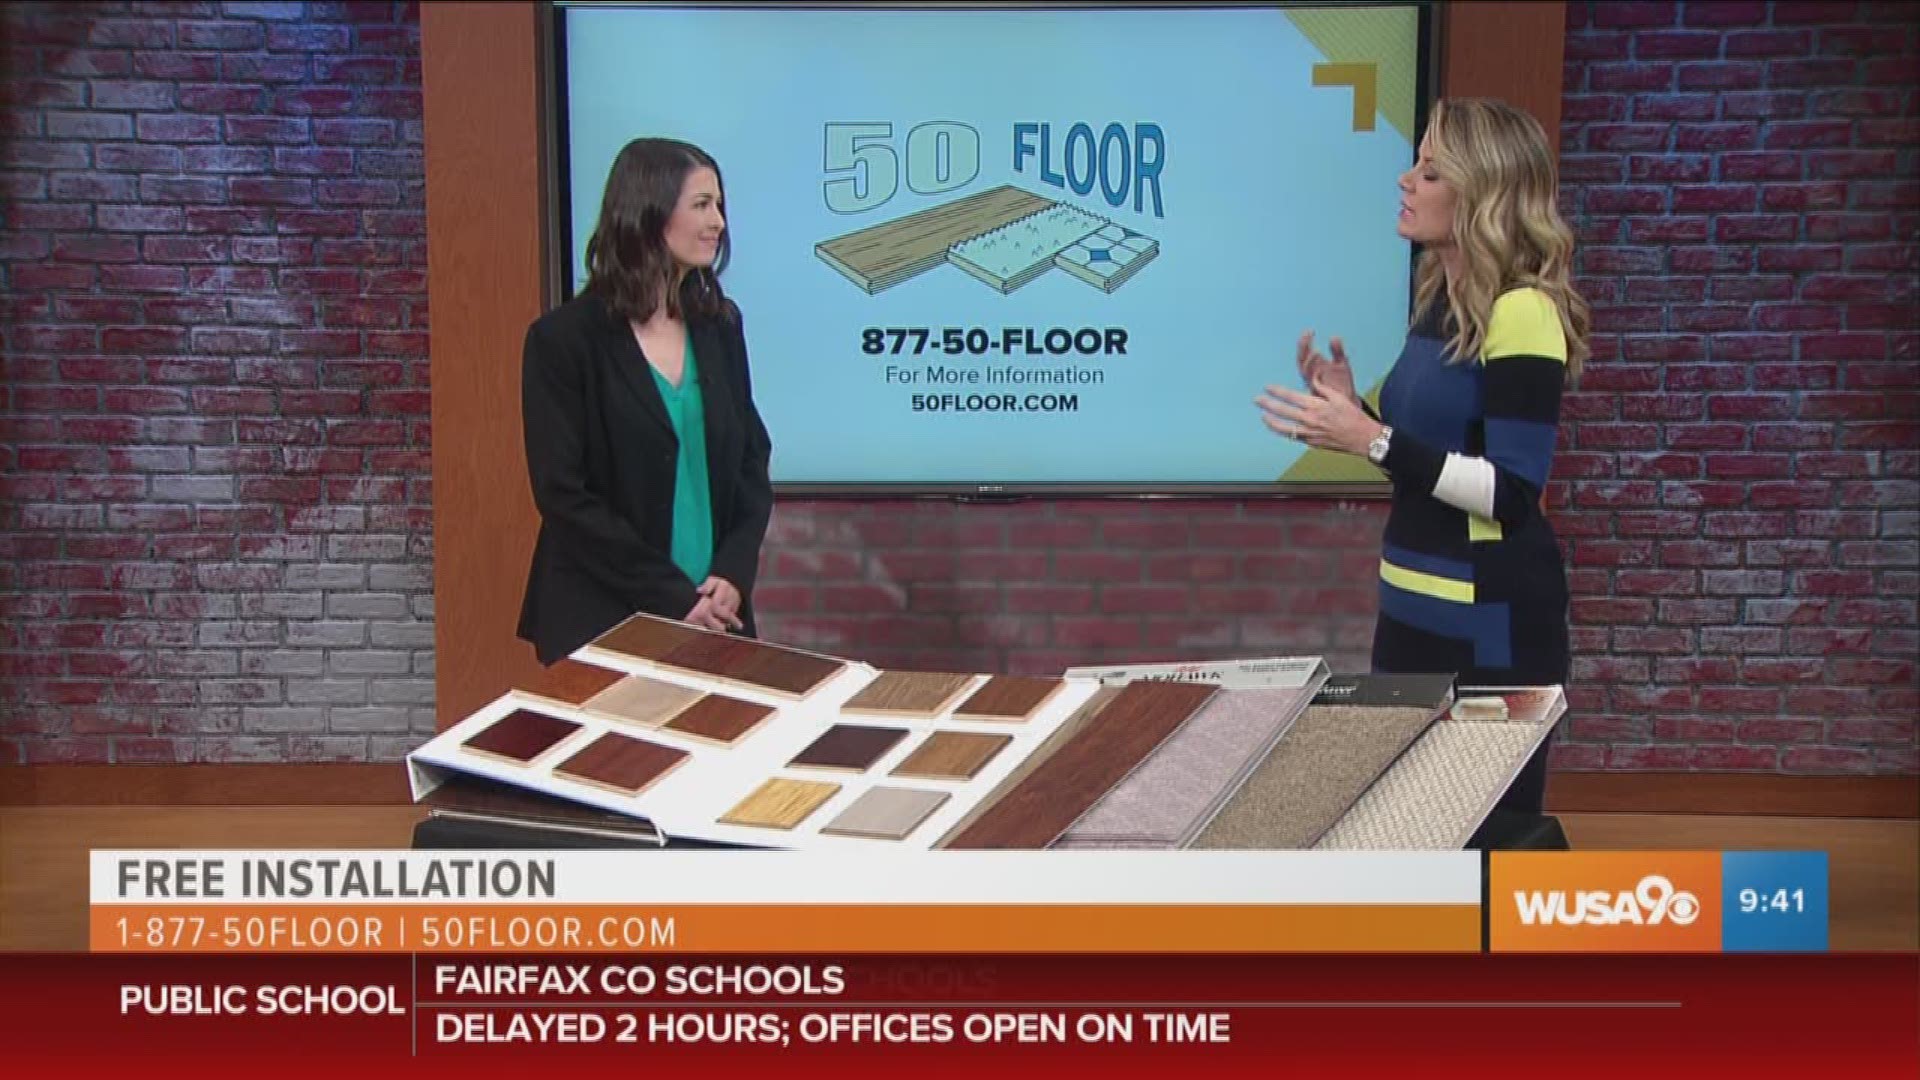 Laura Harders with 50 Floor shares how you can get free flooring installation. For more information call 877-503-5667 or visit their website 50FLOOR.com